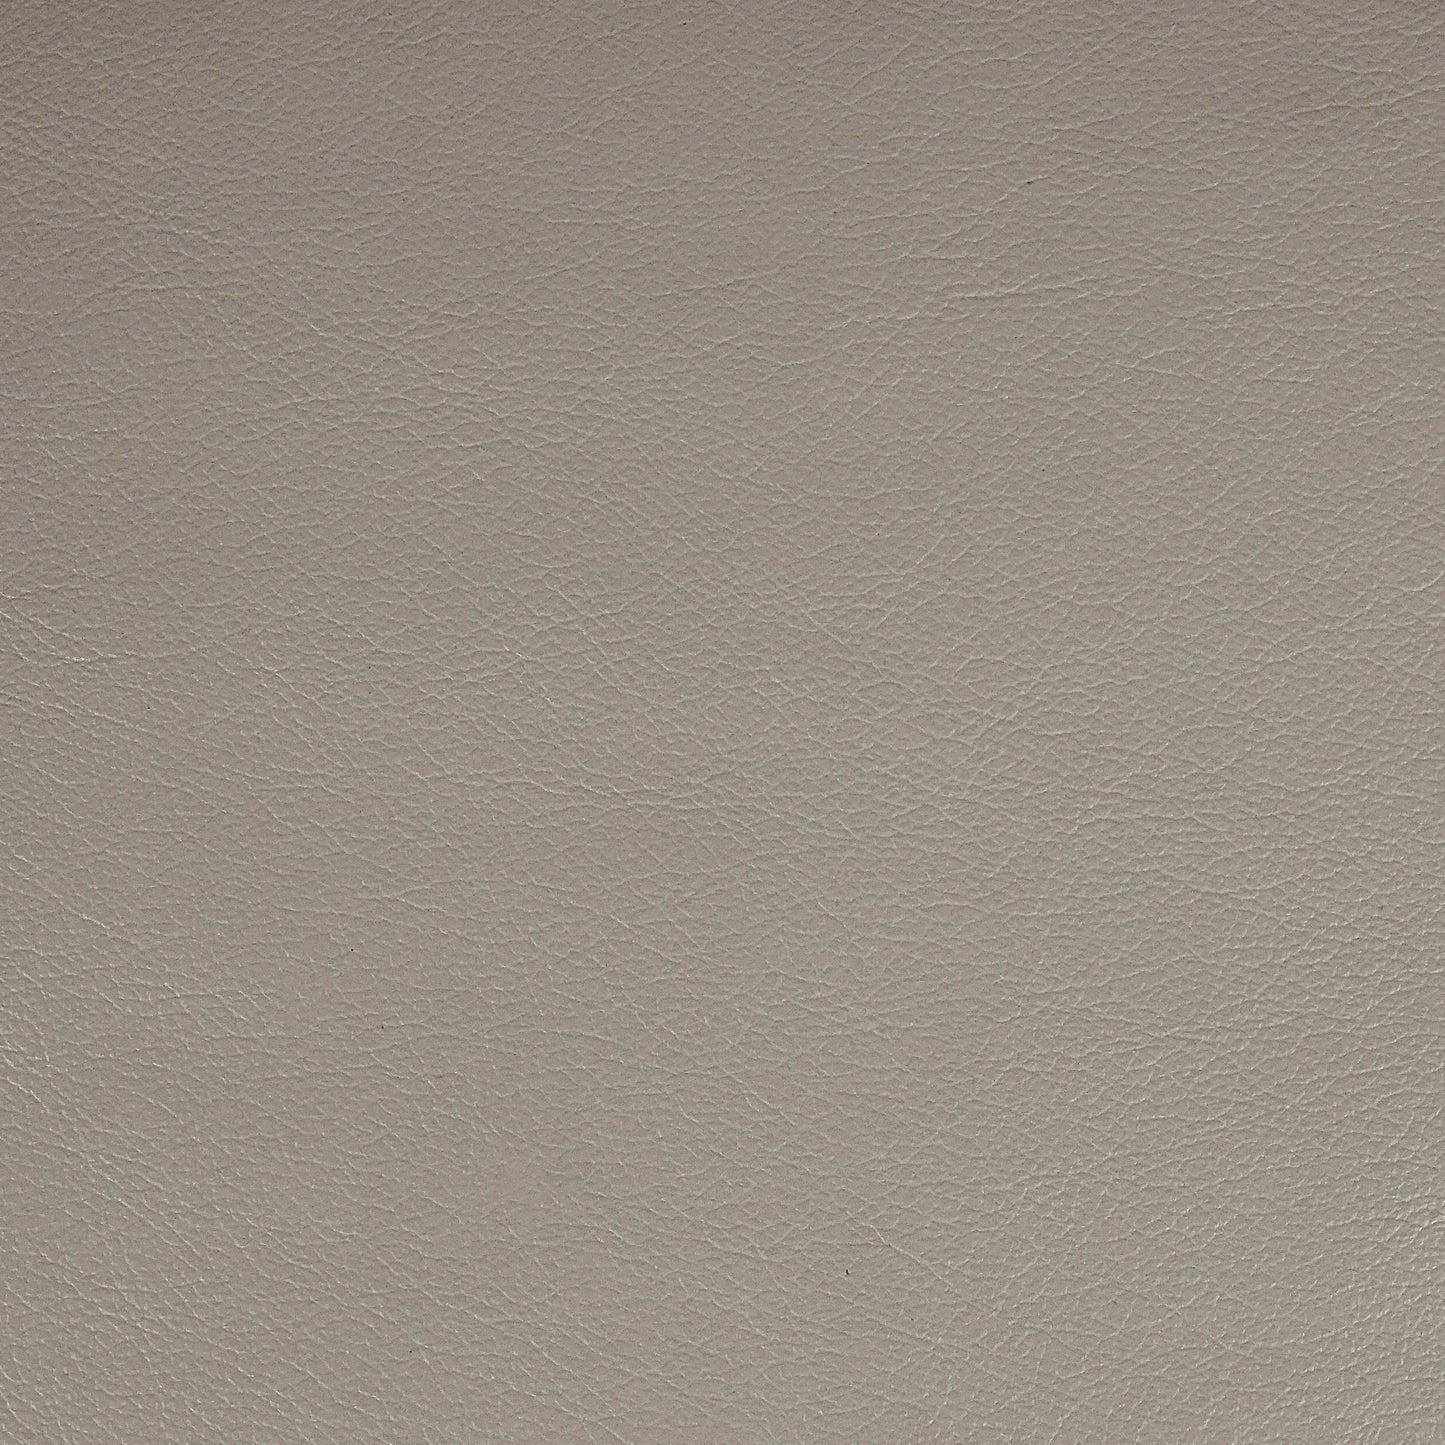 Kismet, Spalding, Iconic® Antimicrobial & Cleanable, Hospitality Leather Hide